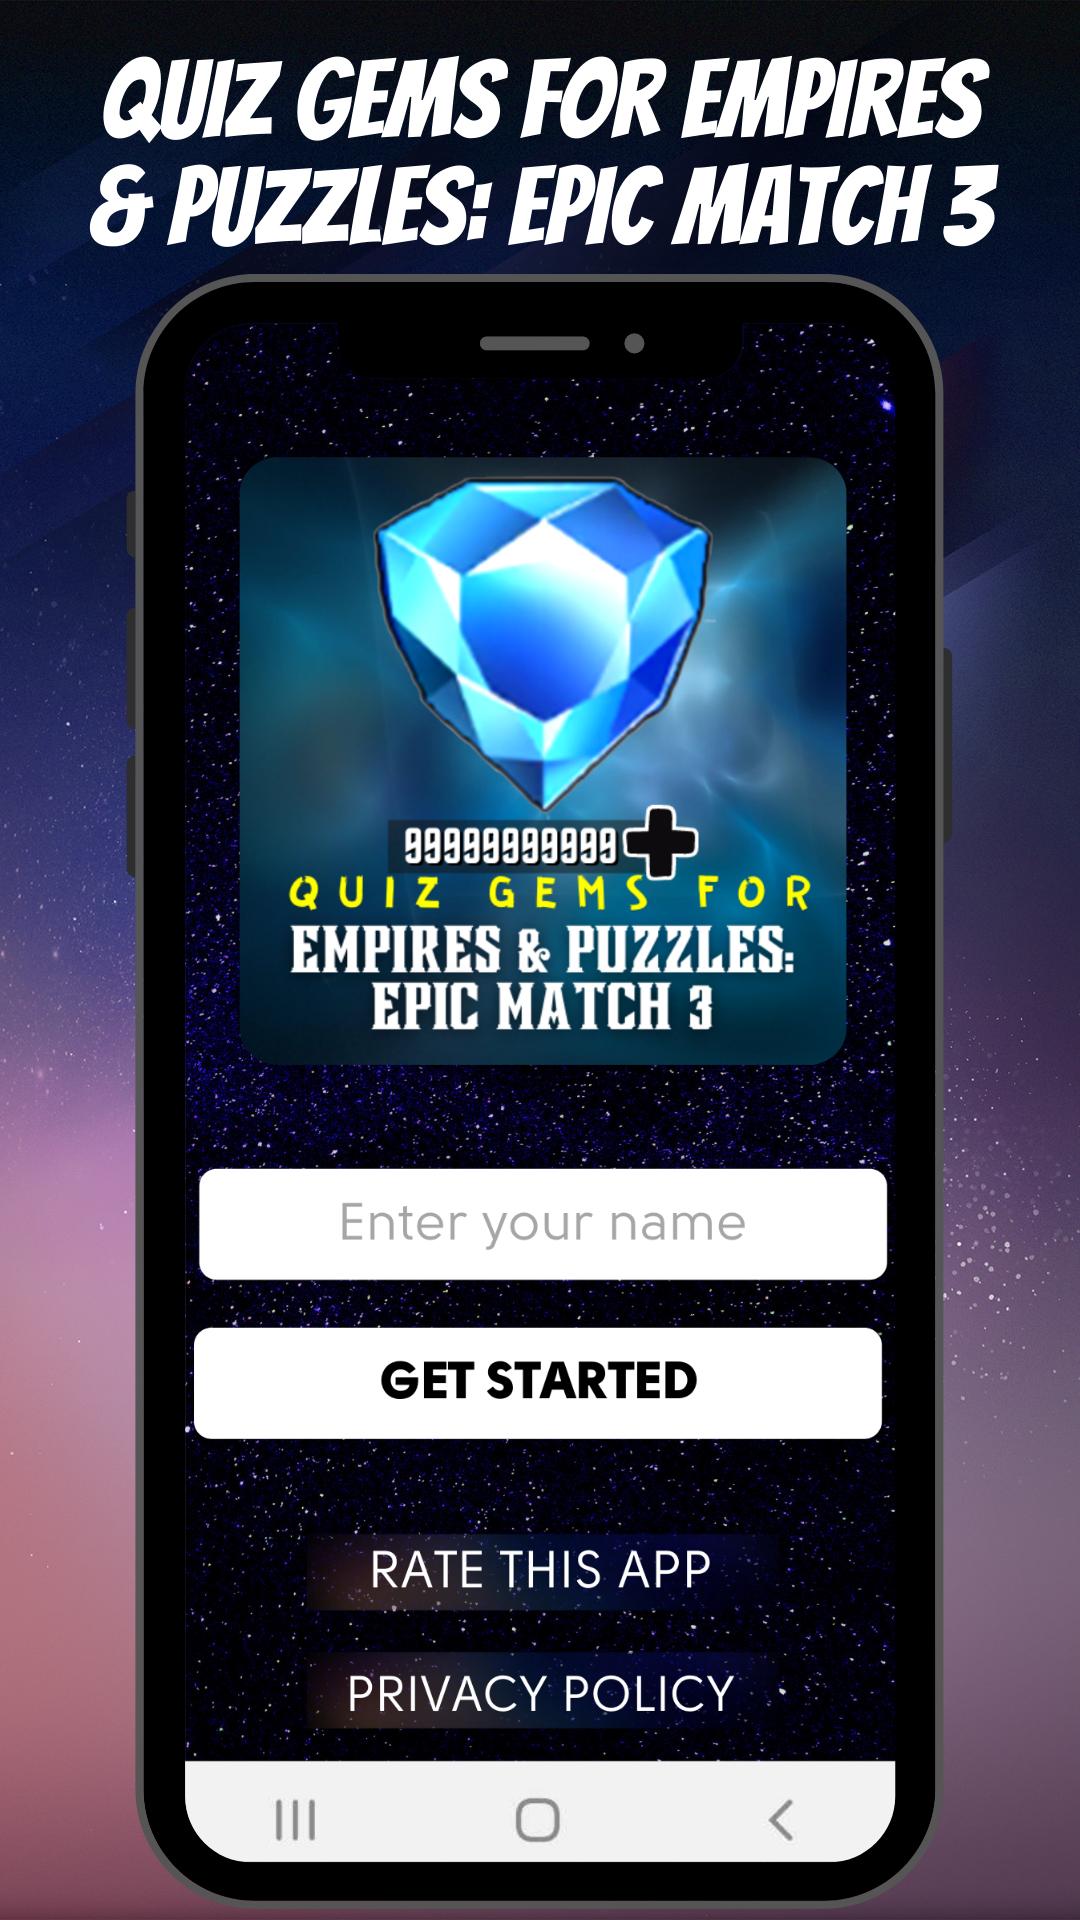 Quiz Gems for Empires & Puzzles: Epic Match 3 for Android - APK Download